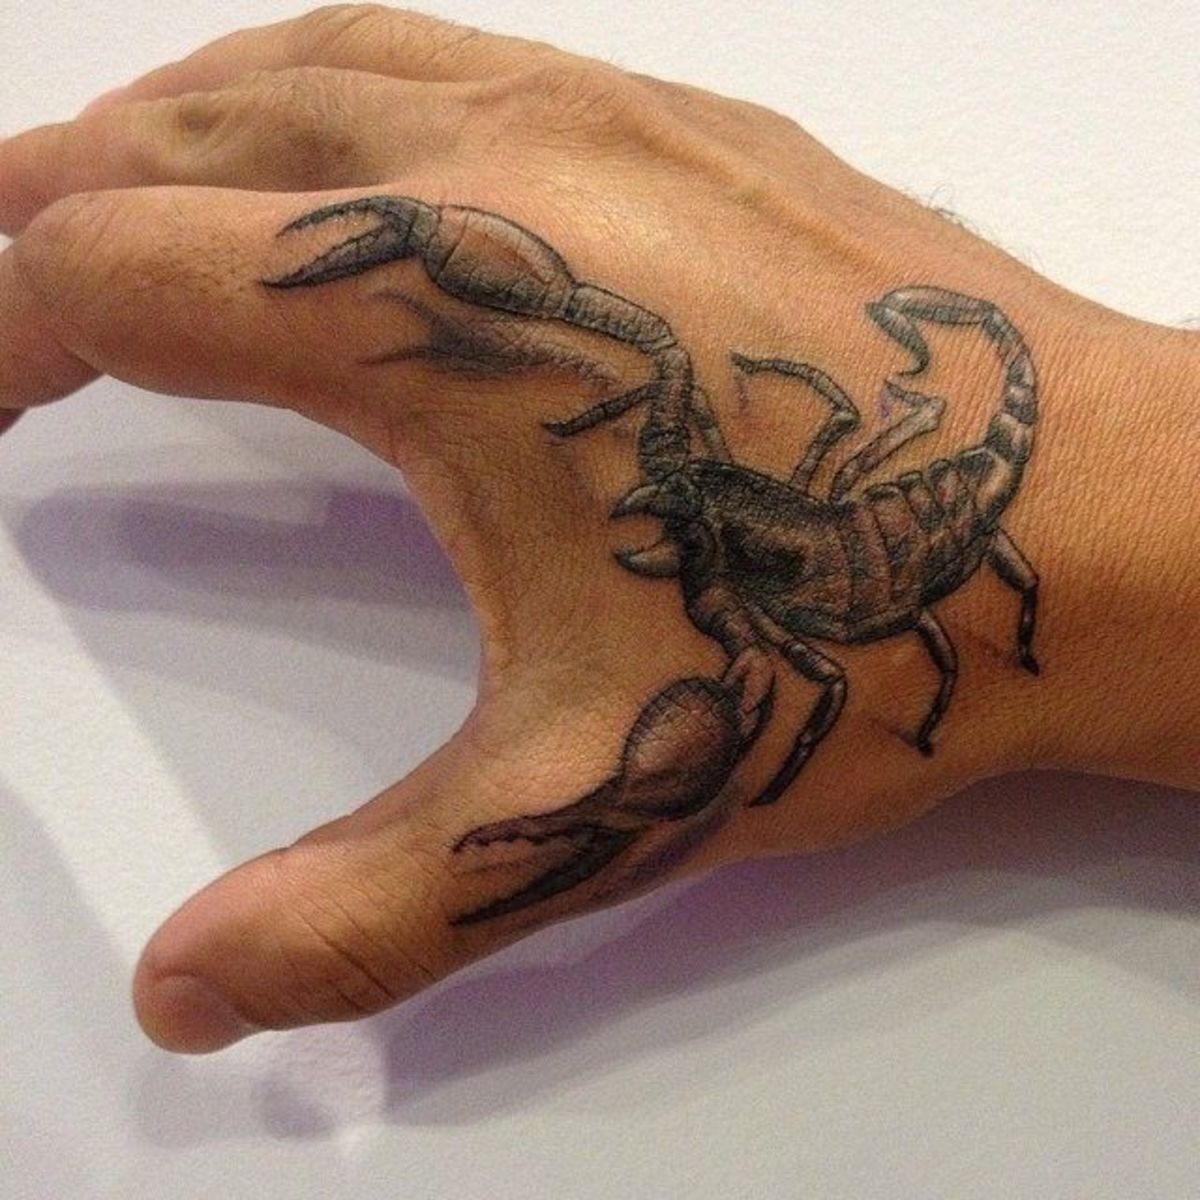 14 Celebrity Scorpion Tattoos  Steal Her Style